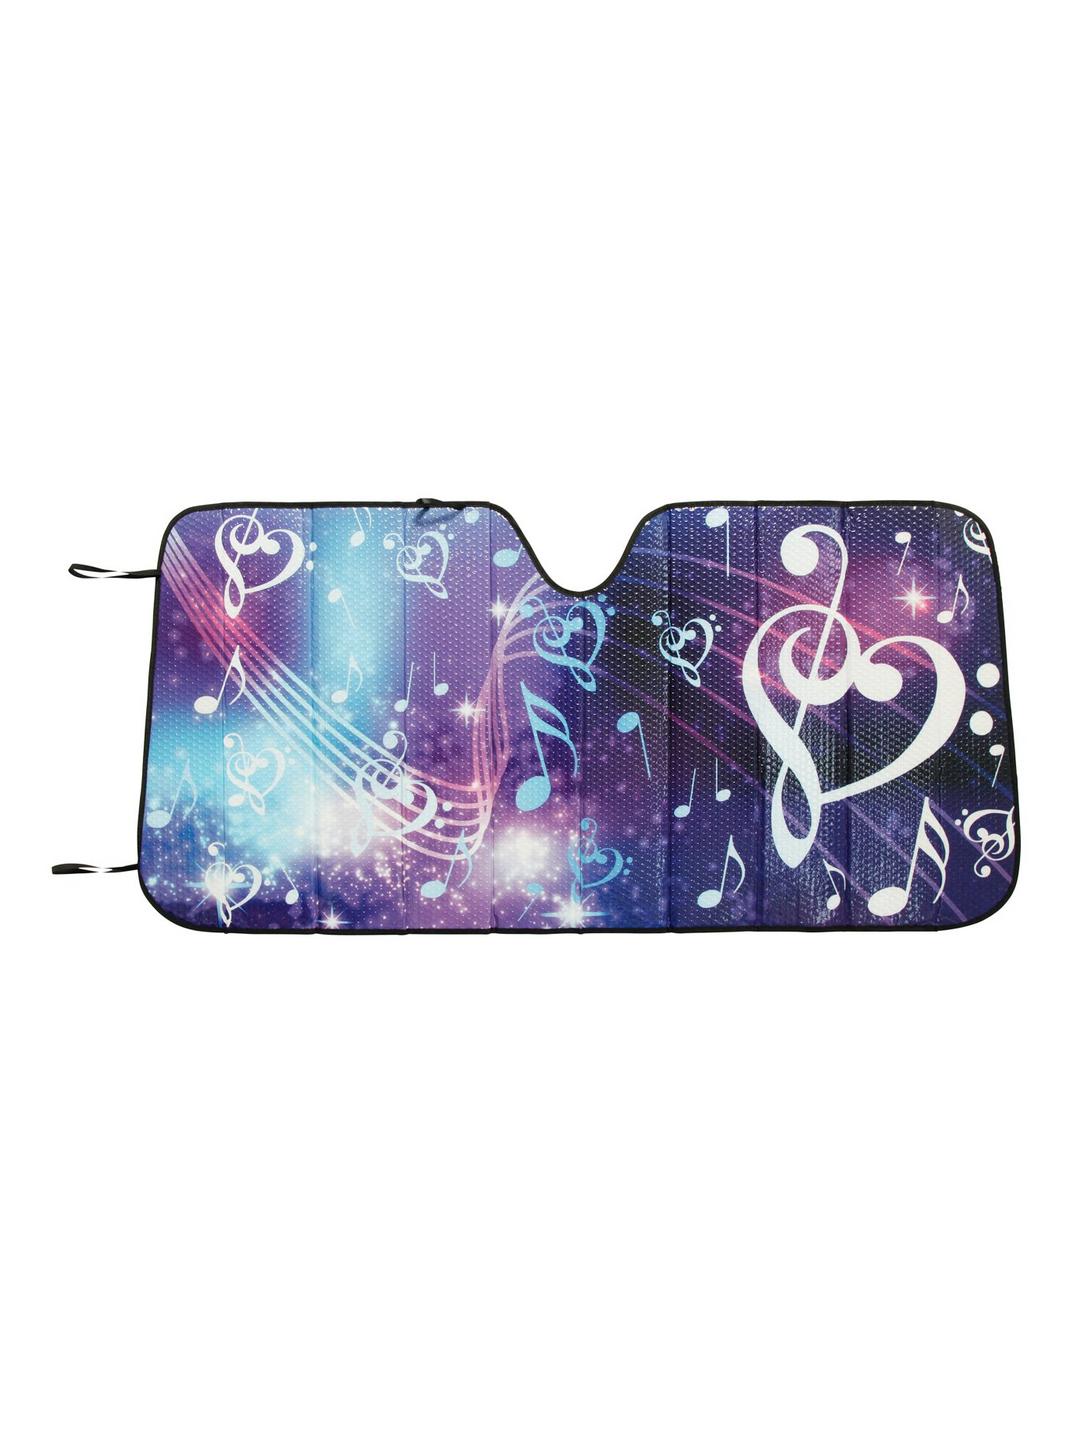 Music Note & Clef Heart Accordion Sunshade, , hi-res